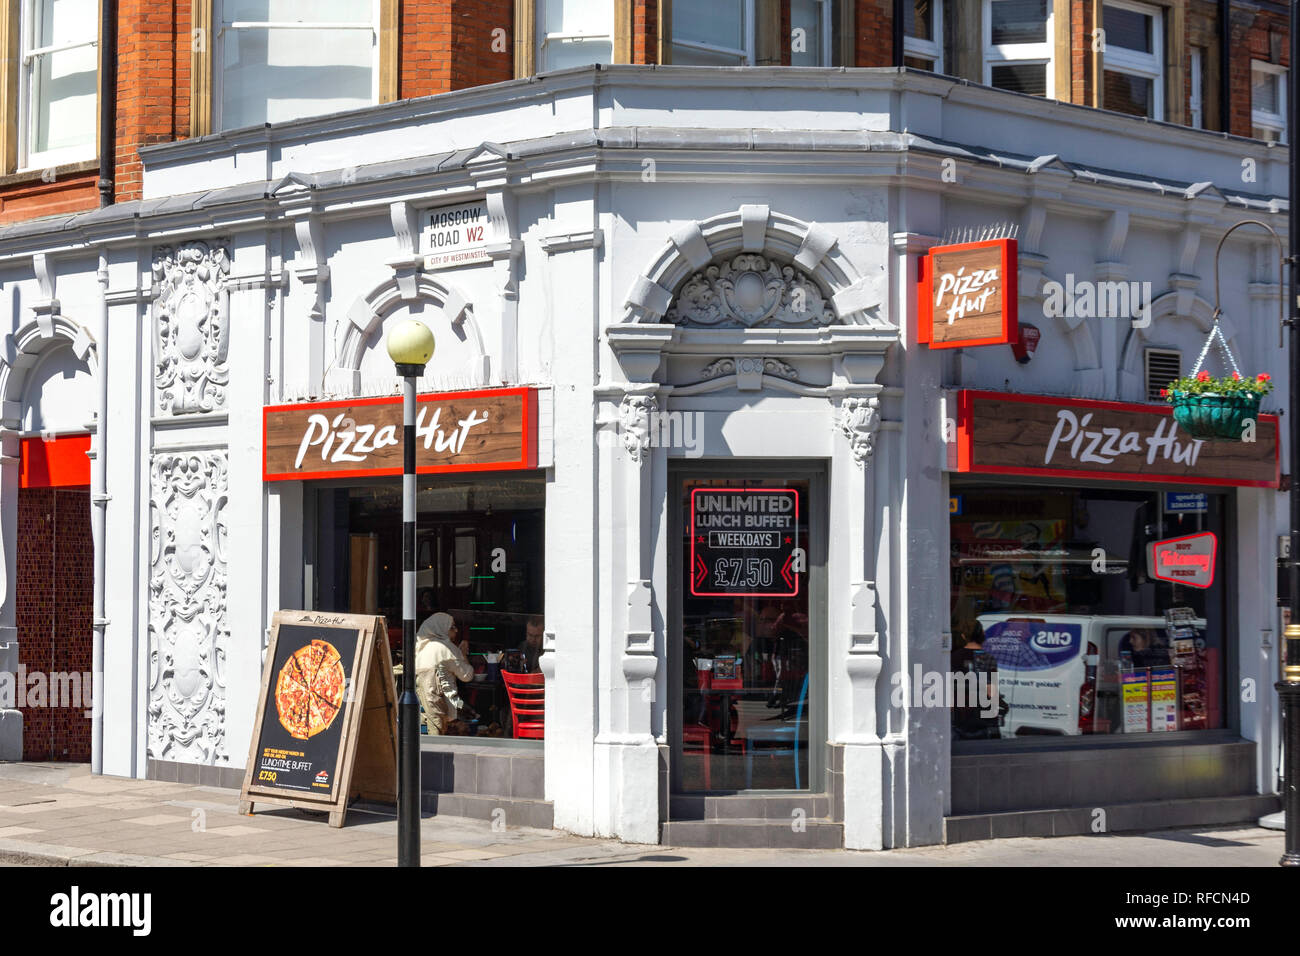 Pizza Hut restaurant, Queensway, Bayswater, City of Westminster, Greater London, England, United Kingdom Stock Photo